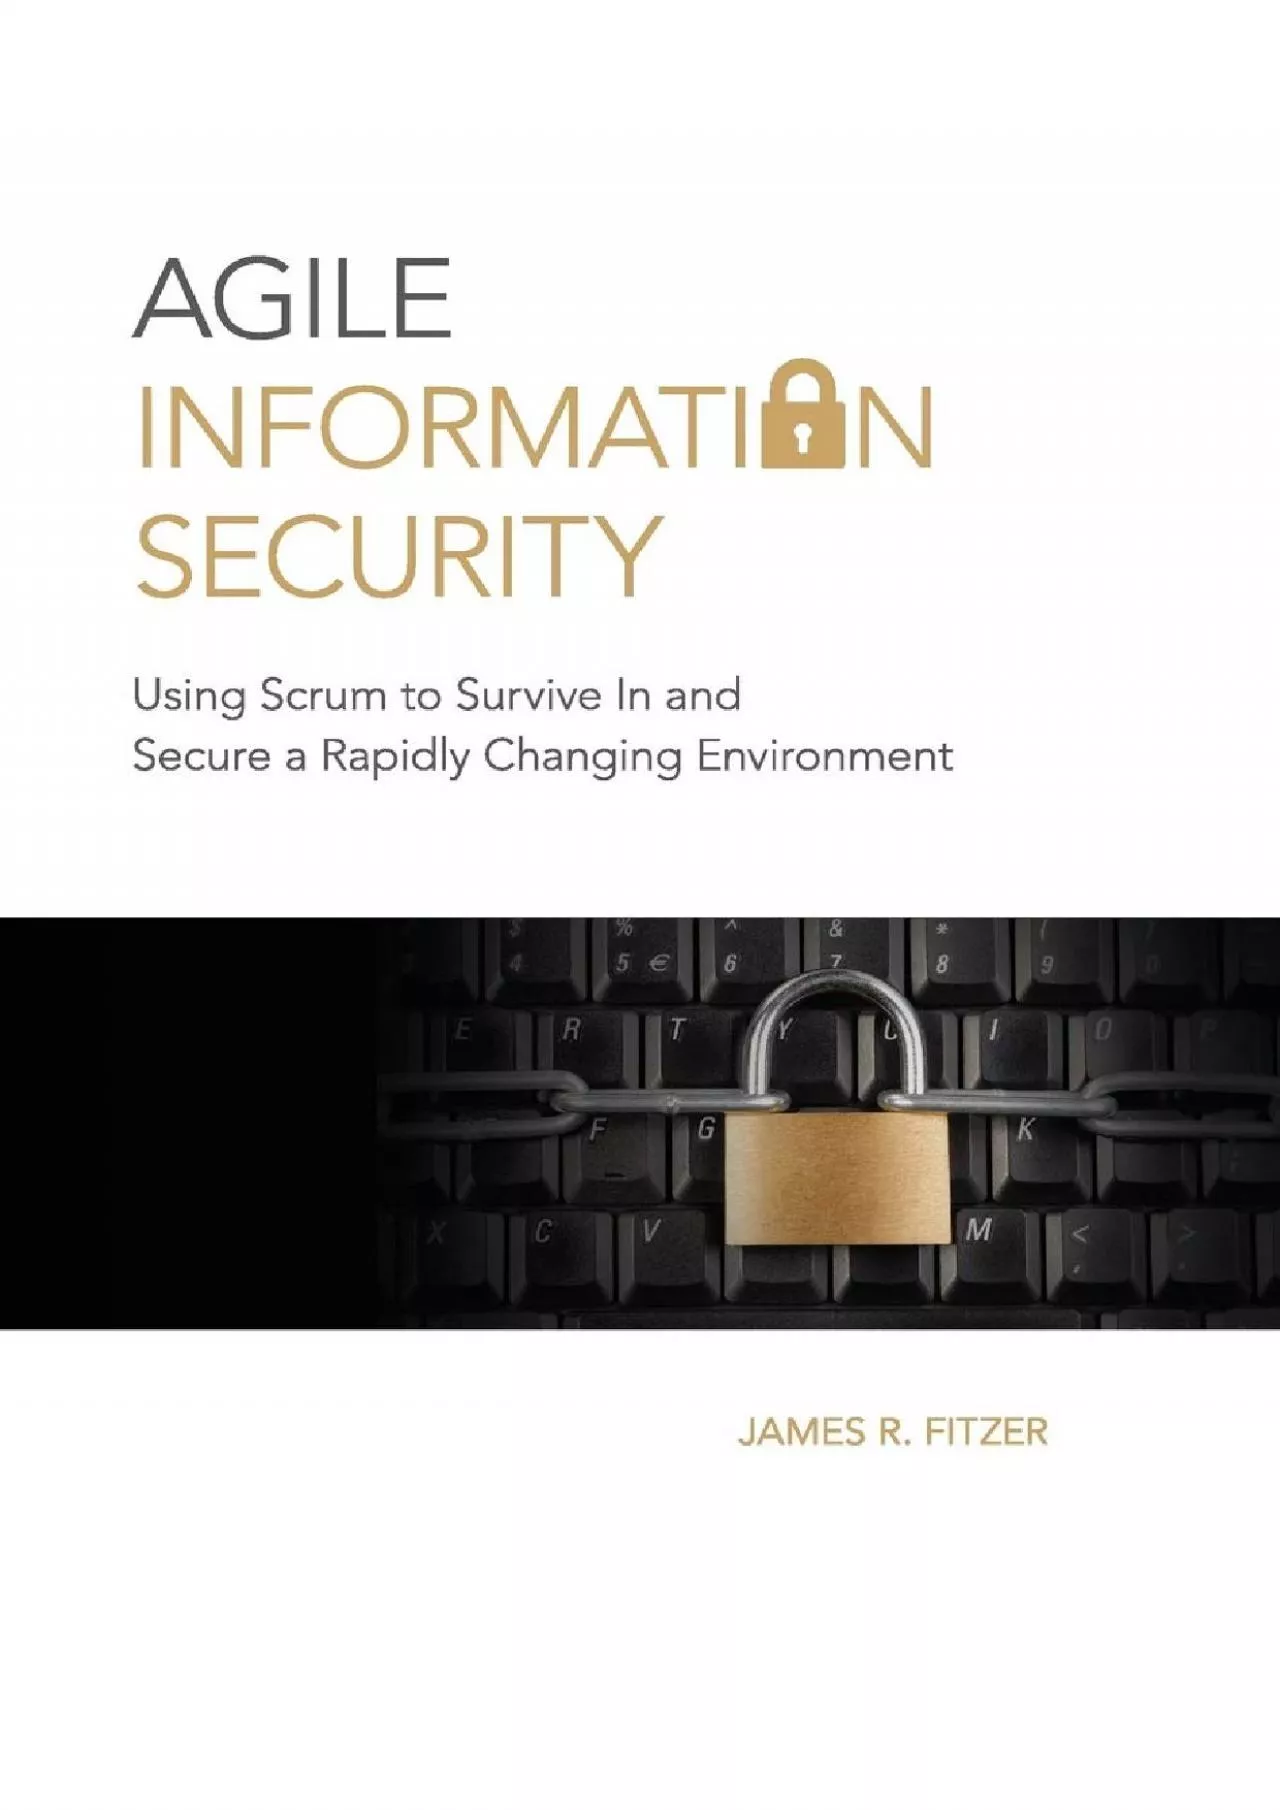 (DOWNLOAD)-Agile Information Security: Using Scrum to Survive In and Secure a Rapidly